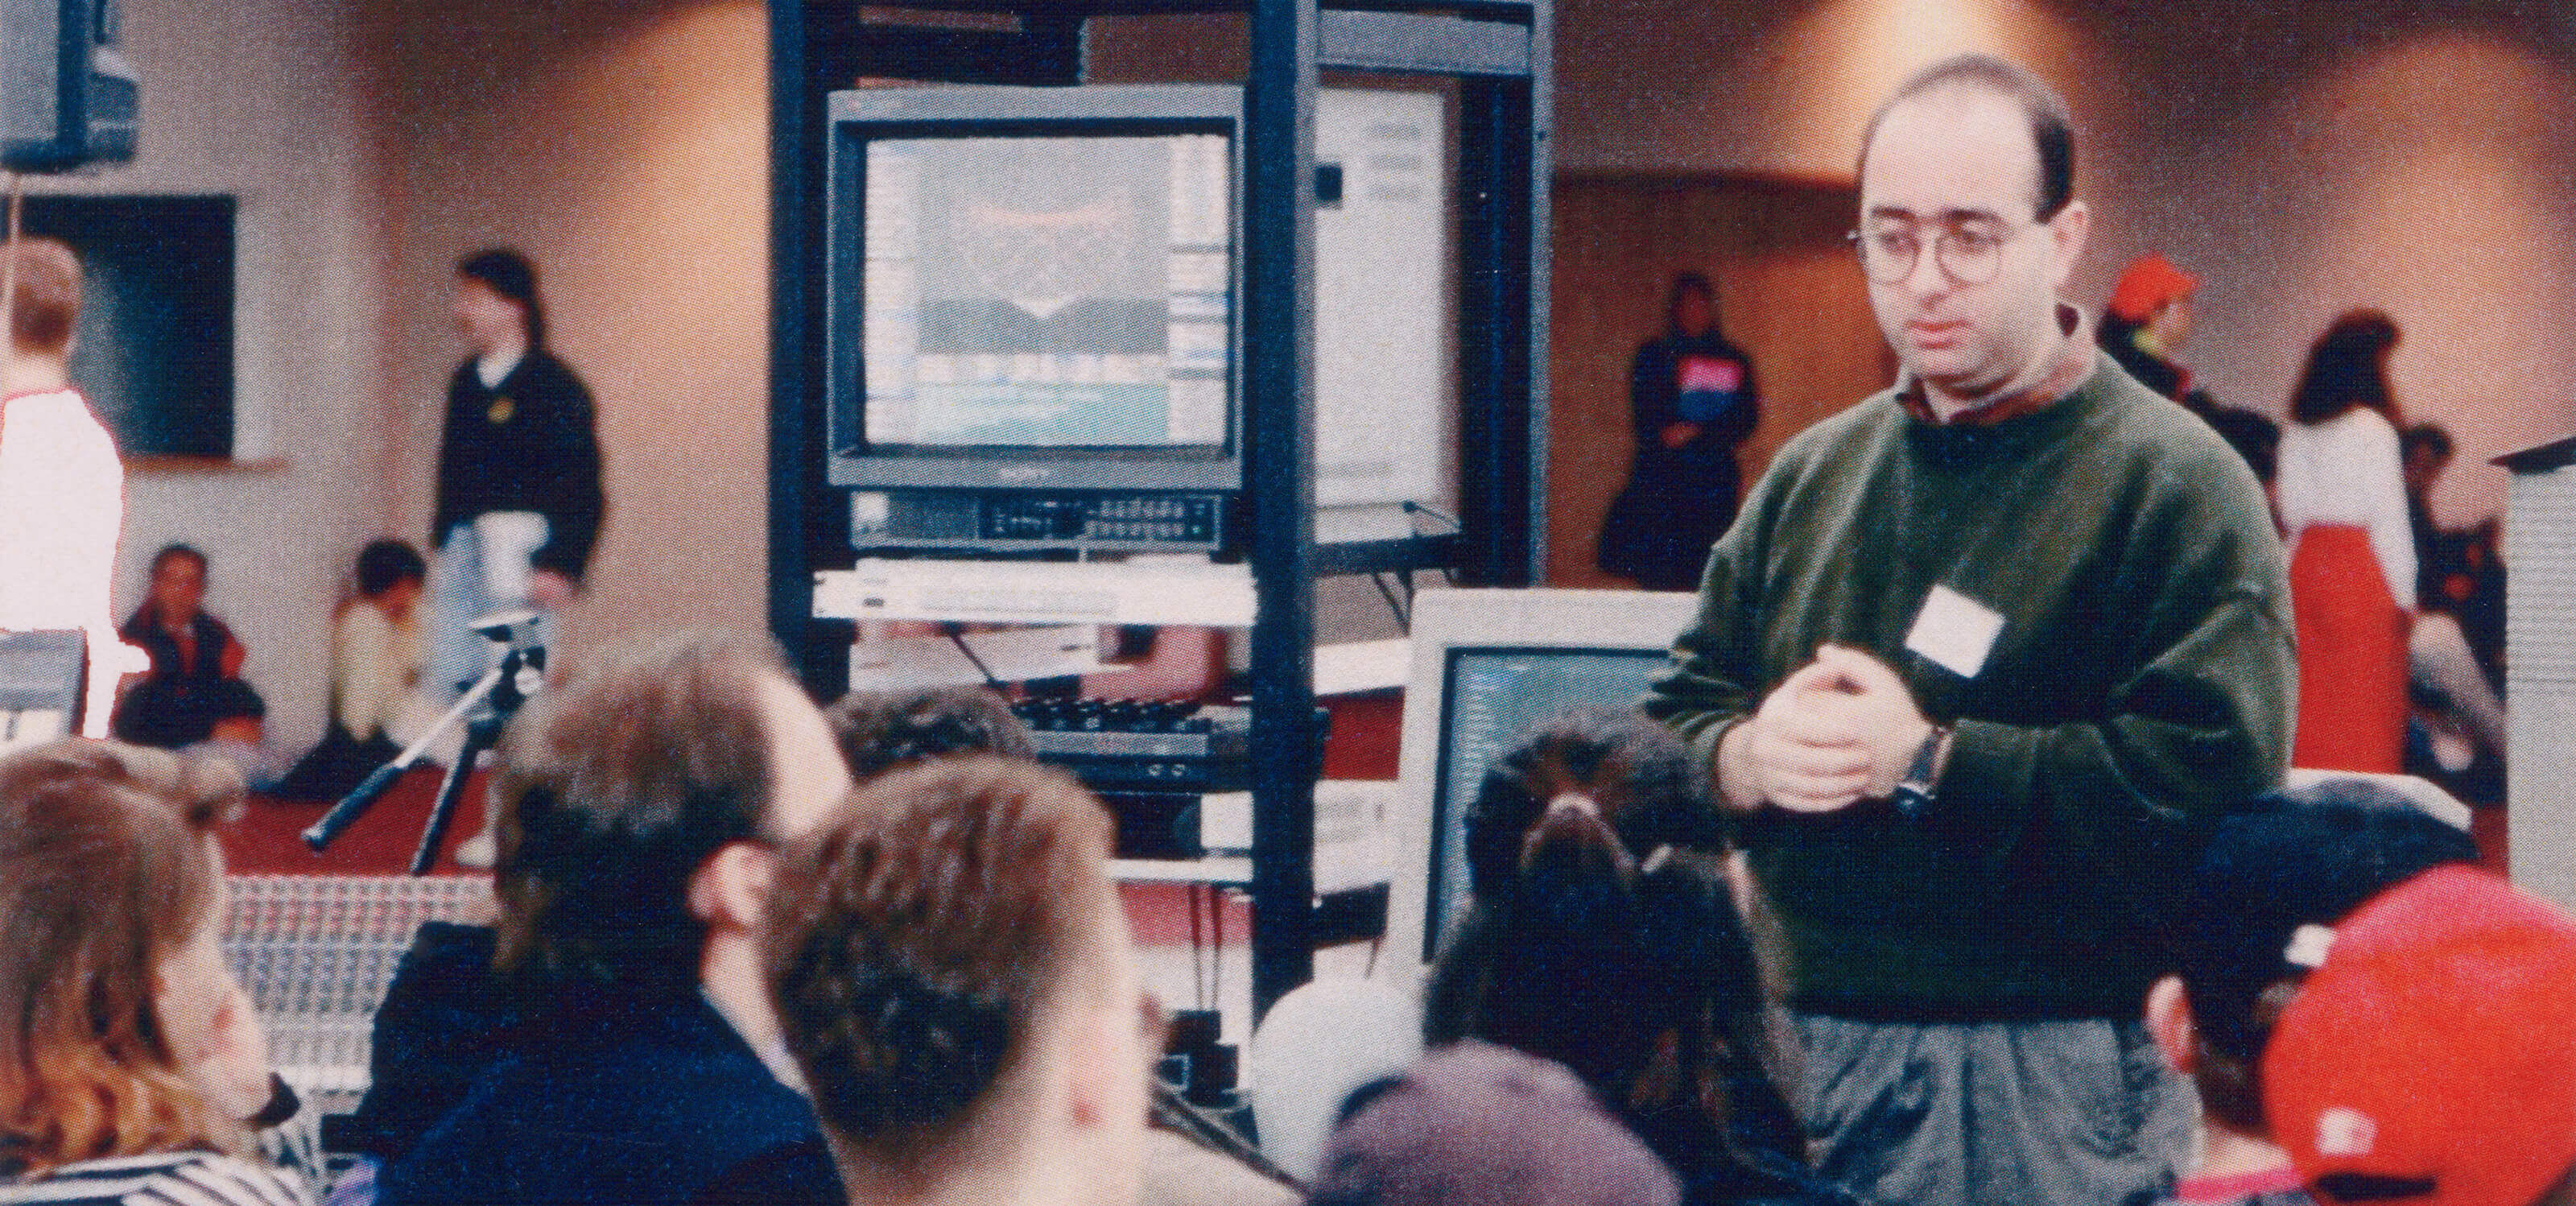 DigiPen founder and president Claude Comair speaks at a convention in 1989